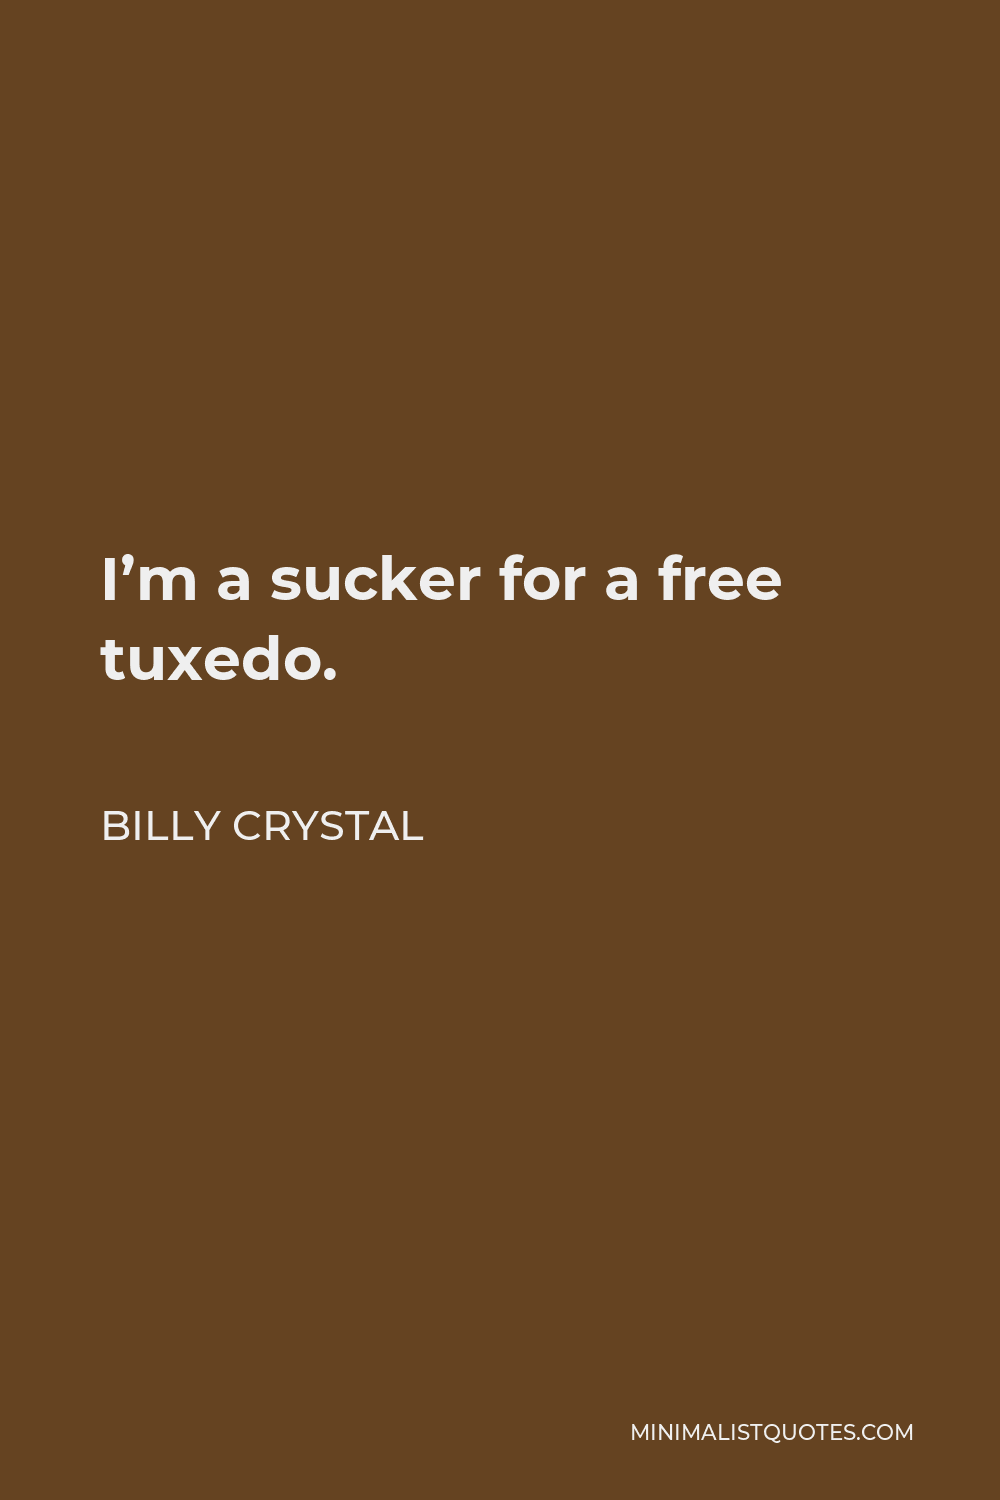 Billy Crystal Quote - I’m a sucker for a free tuxedo.